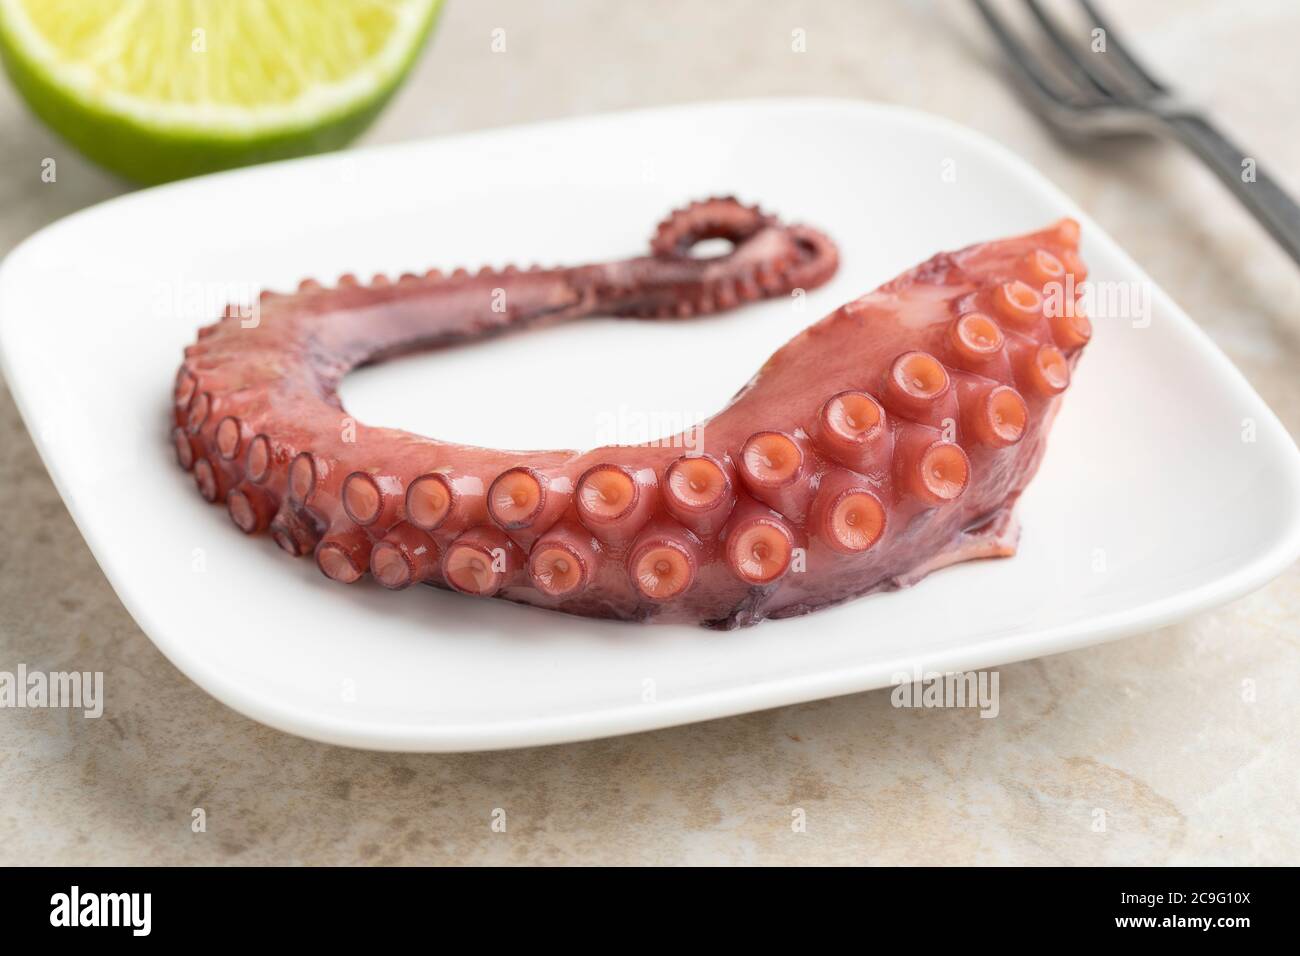 Fresh cooked octopus tentacle close up on a dish Stock Photo